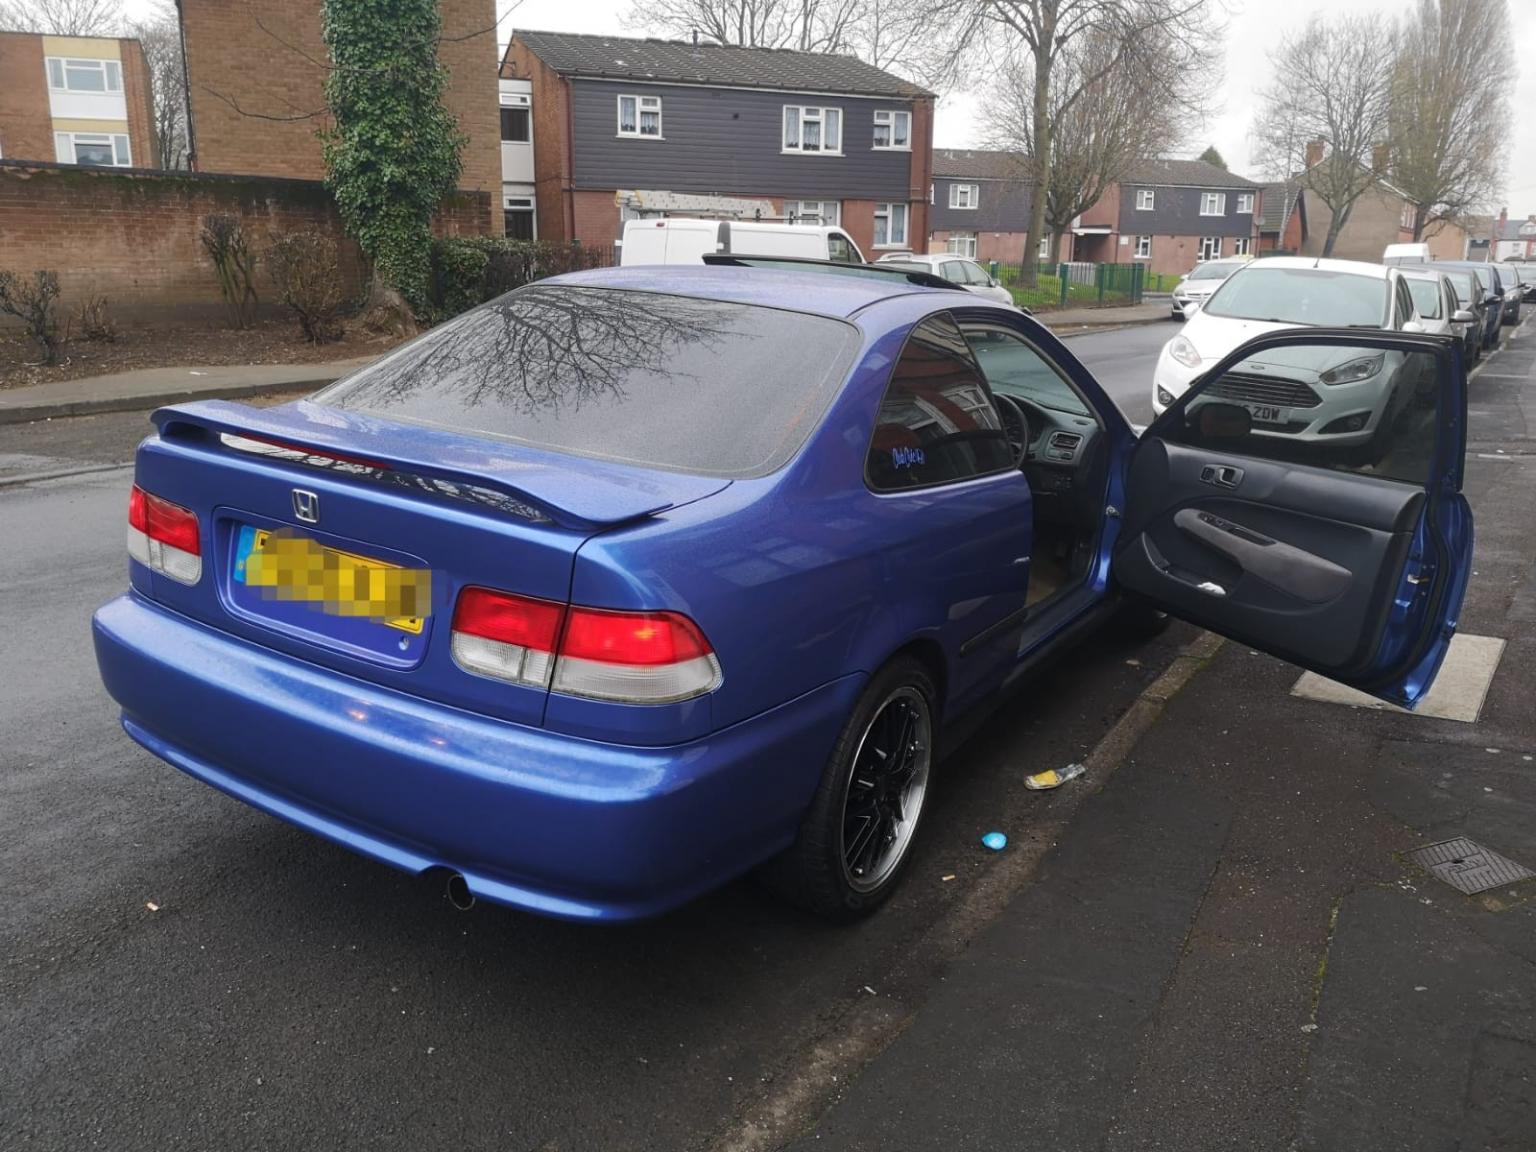 Honda Civic 1.6 Se Coupe 1999 Ej6 in WS10 Walsall for £